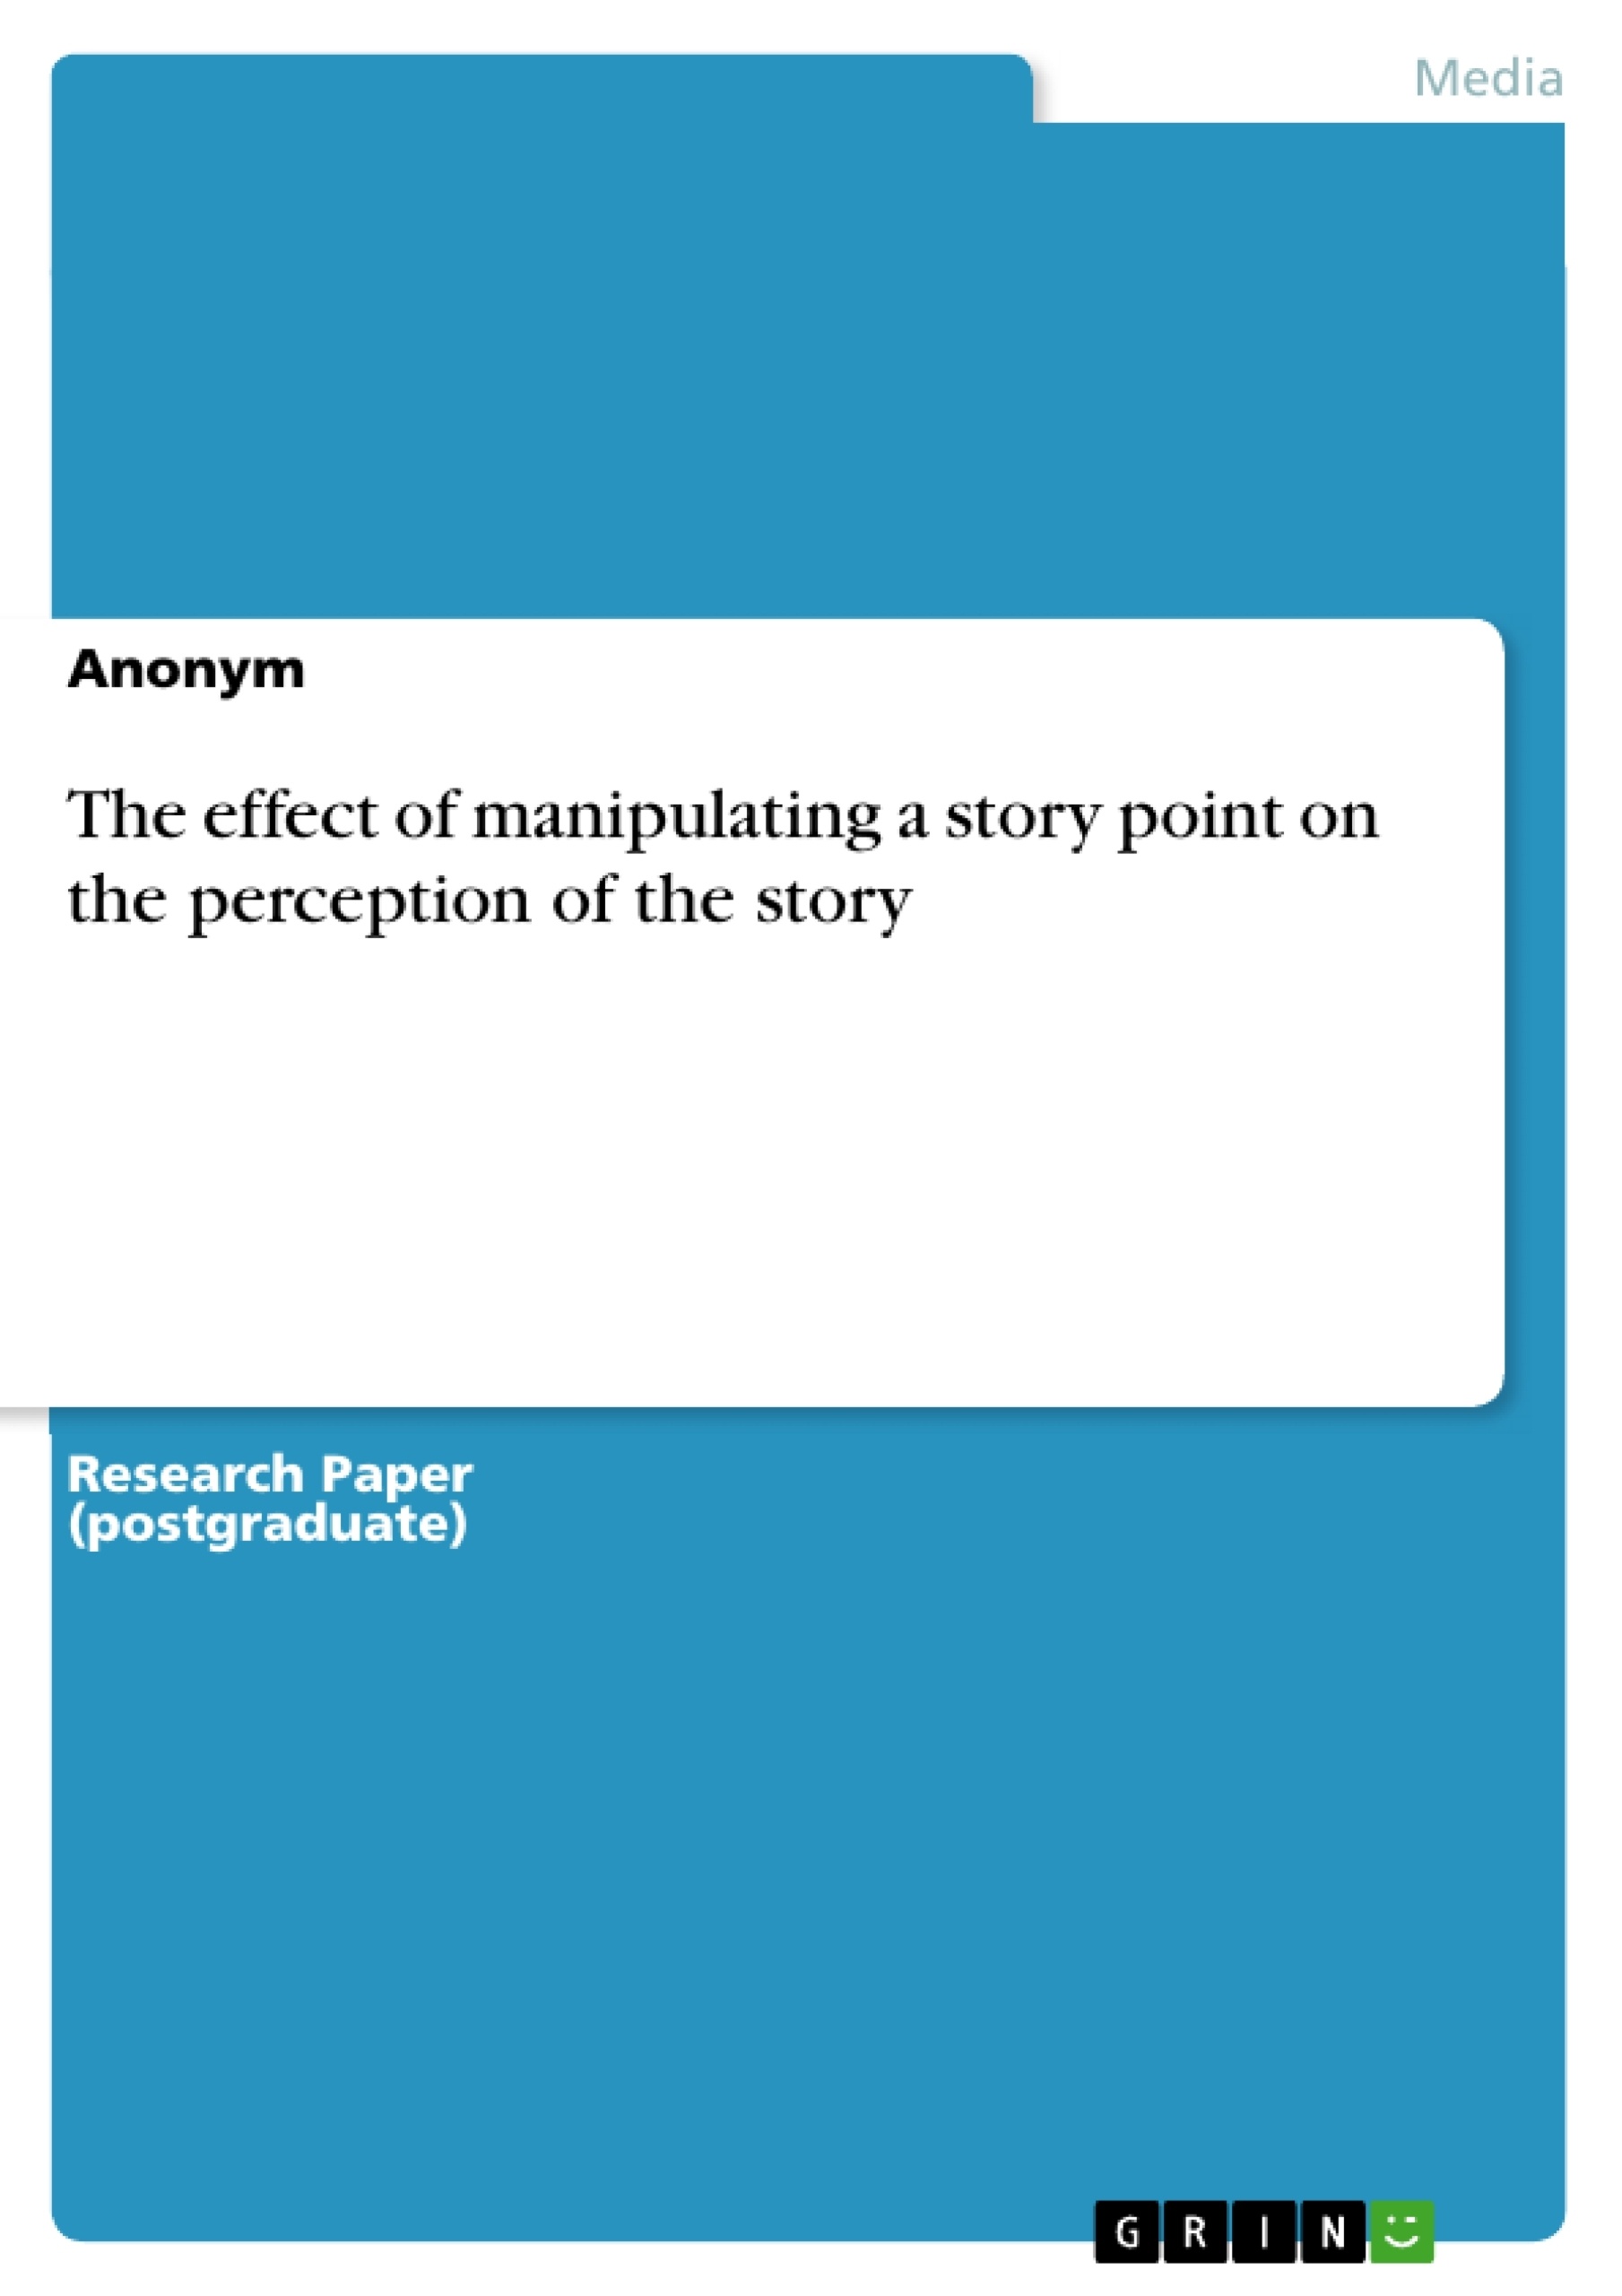 Título: The effect of manipulating a story point  on the perception of the story